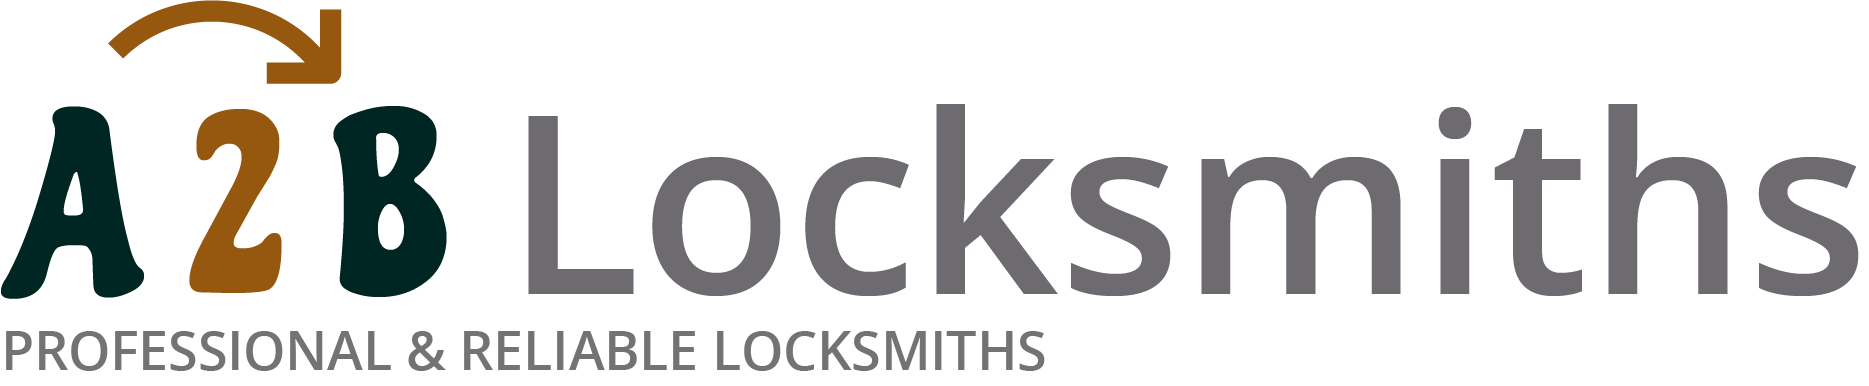 If you are locked out of house in Clerkenwell, our 24/7 local emergency locksmith services can help you.